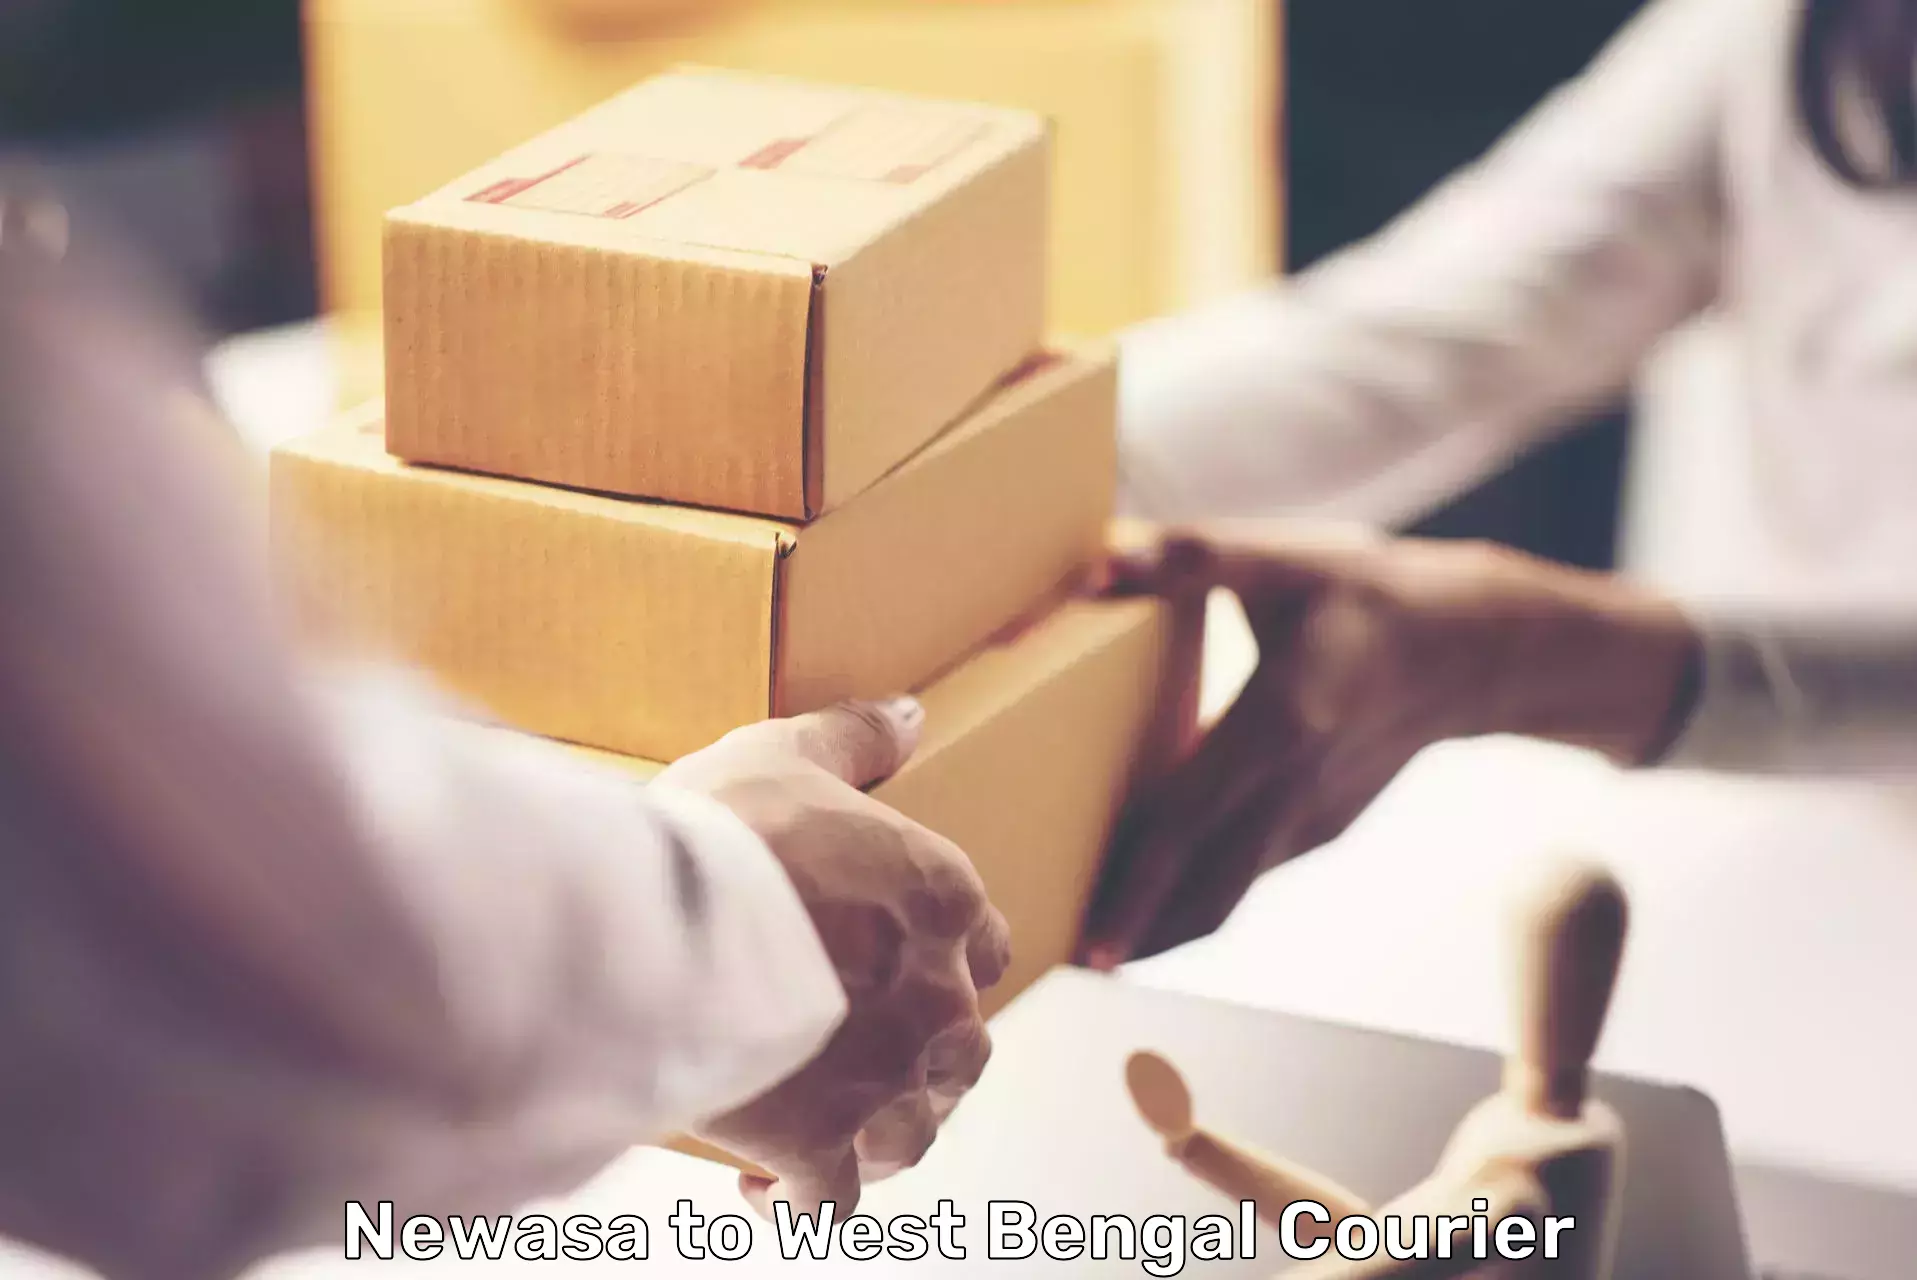 Efficient order fulfillment Newasa to West Bengal